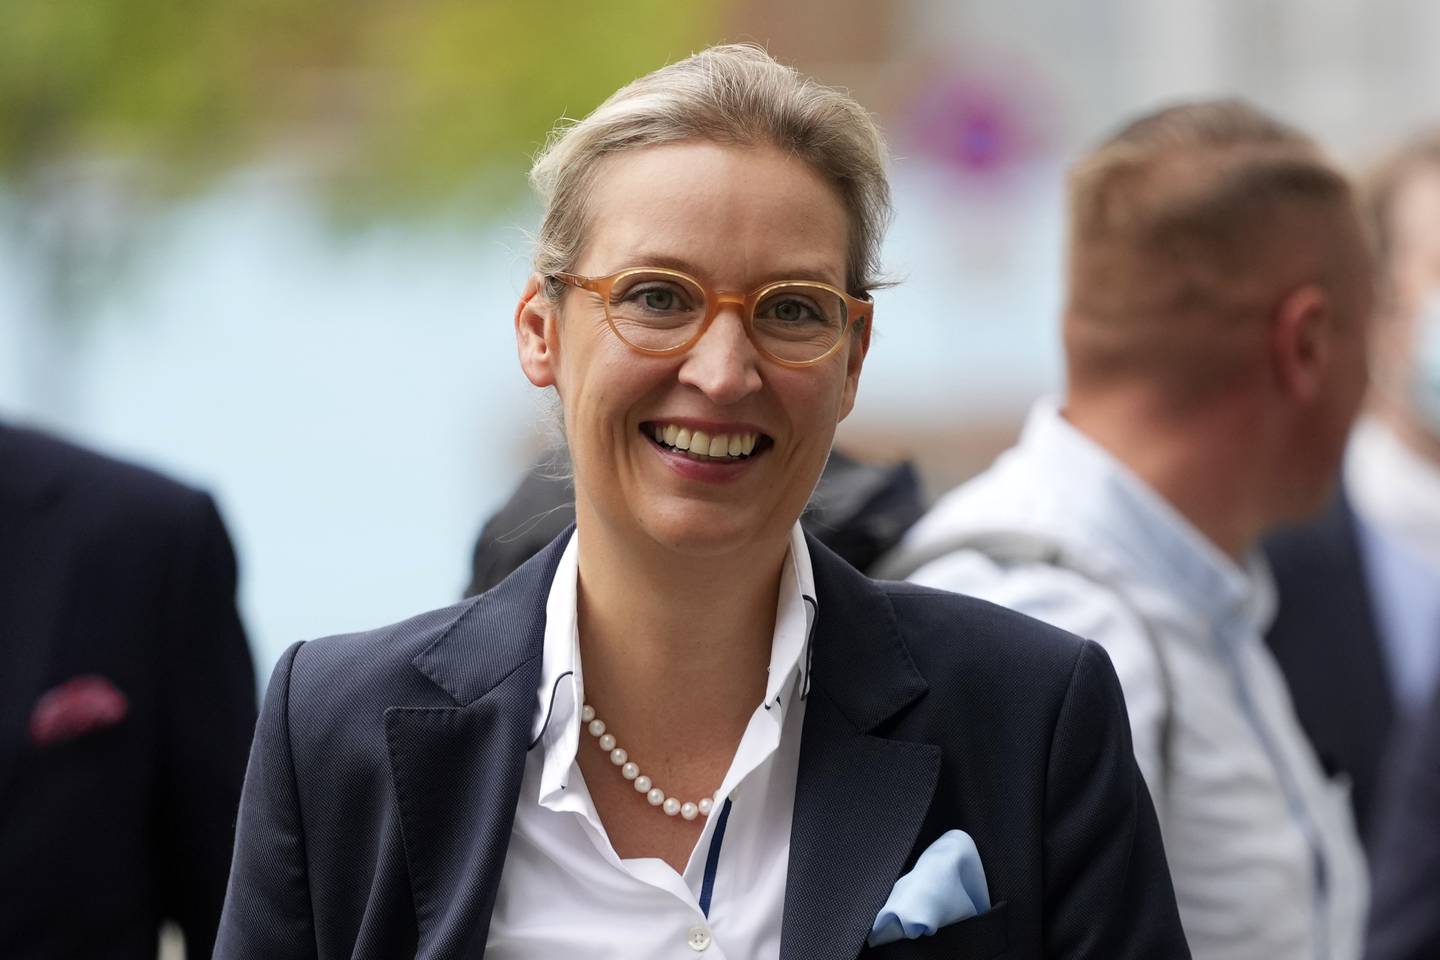 Parliamentary group co-leader and top candidate of Germany's Alternative for Germany (AfD) party Alice Weidel arrives for a press conference in Berlin, Germany, Monday, Sept. 27, 2021. Following Sunday's election leaders of the German parties were meeting Monday to digest a result that saw Merkel's Union bloc slump to its worst-ever result in a national election and appeared to put the keys to power in the hands of two opposition parties. Both Social Democrat Olaf Scholz and Armin Laschet, the candidate of Merkel's party, laid a claim to leading the next government. (AP Photo/Matthias Schrader)